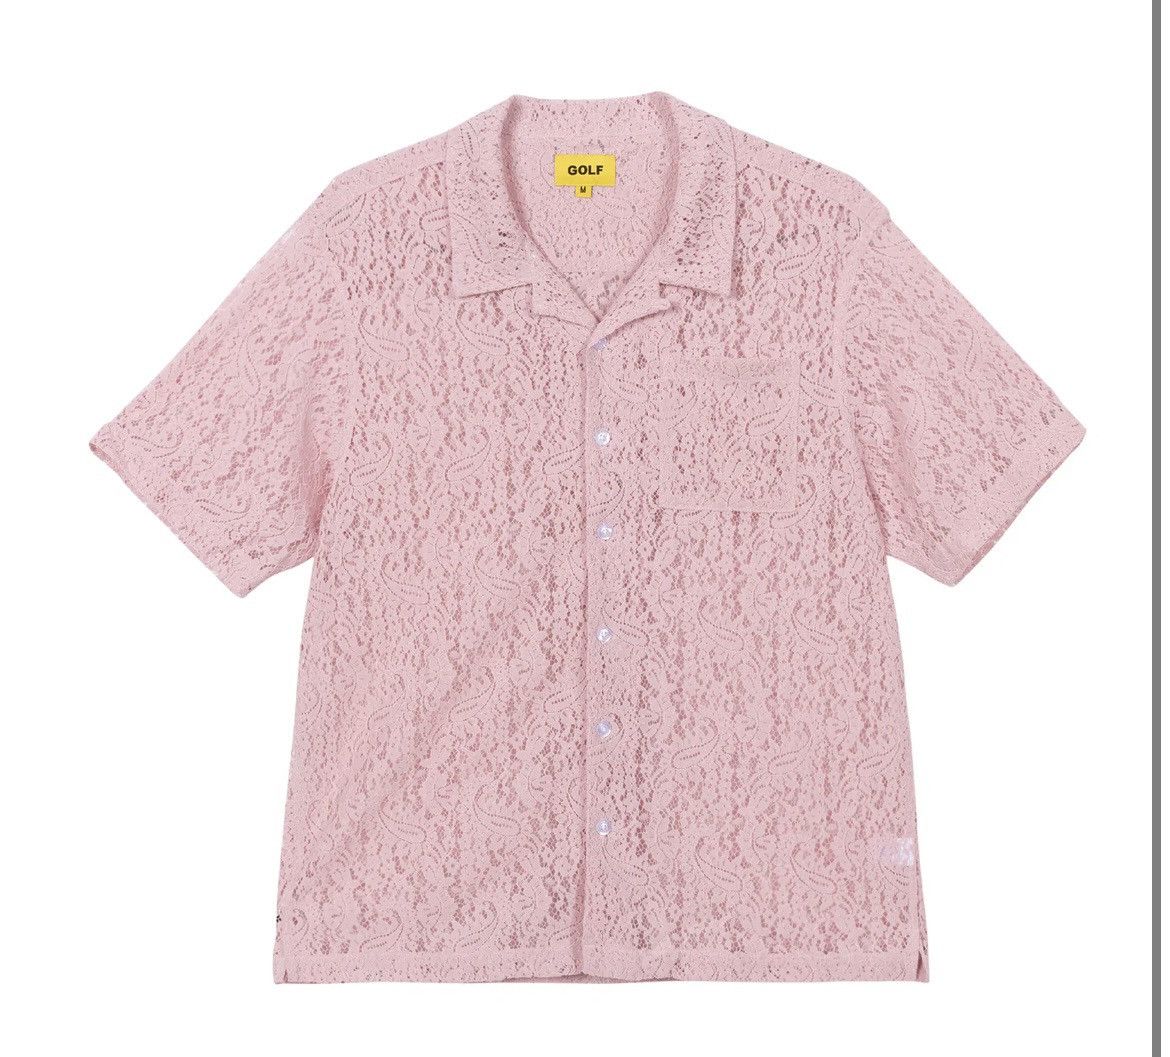 LACE PATTERN BUTTON UP by GOLF WANG-